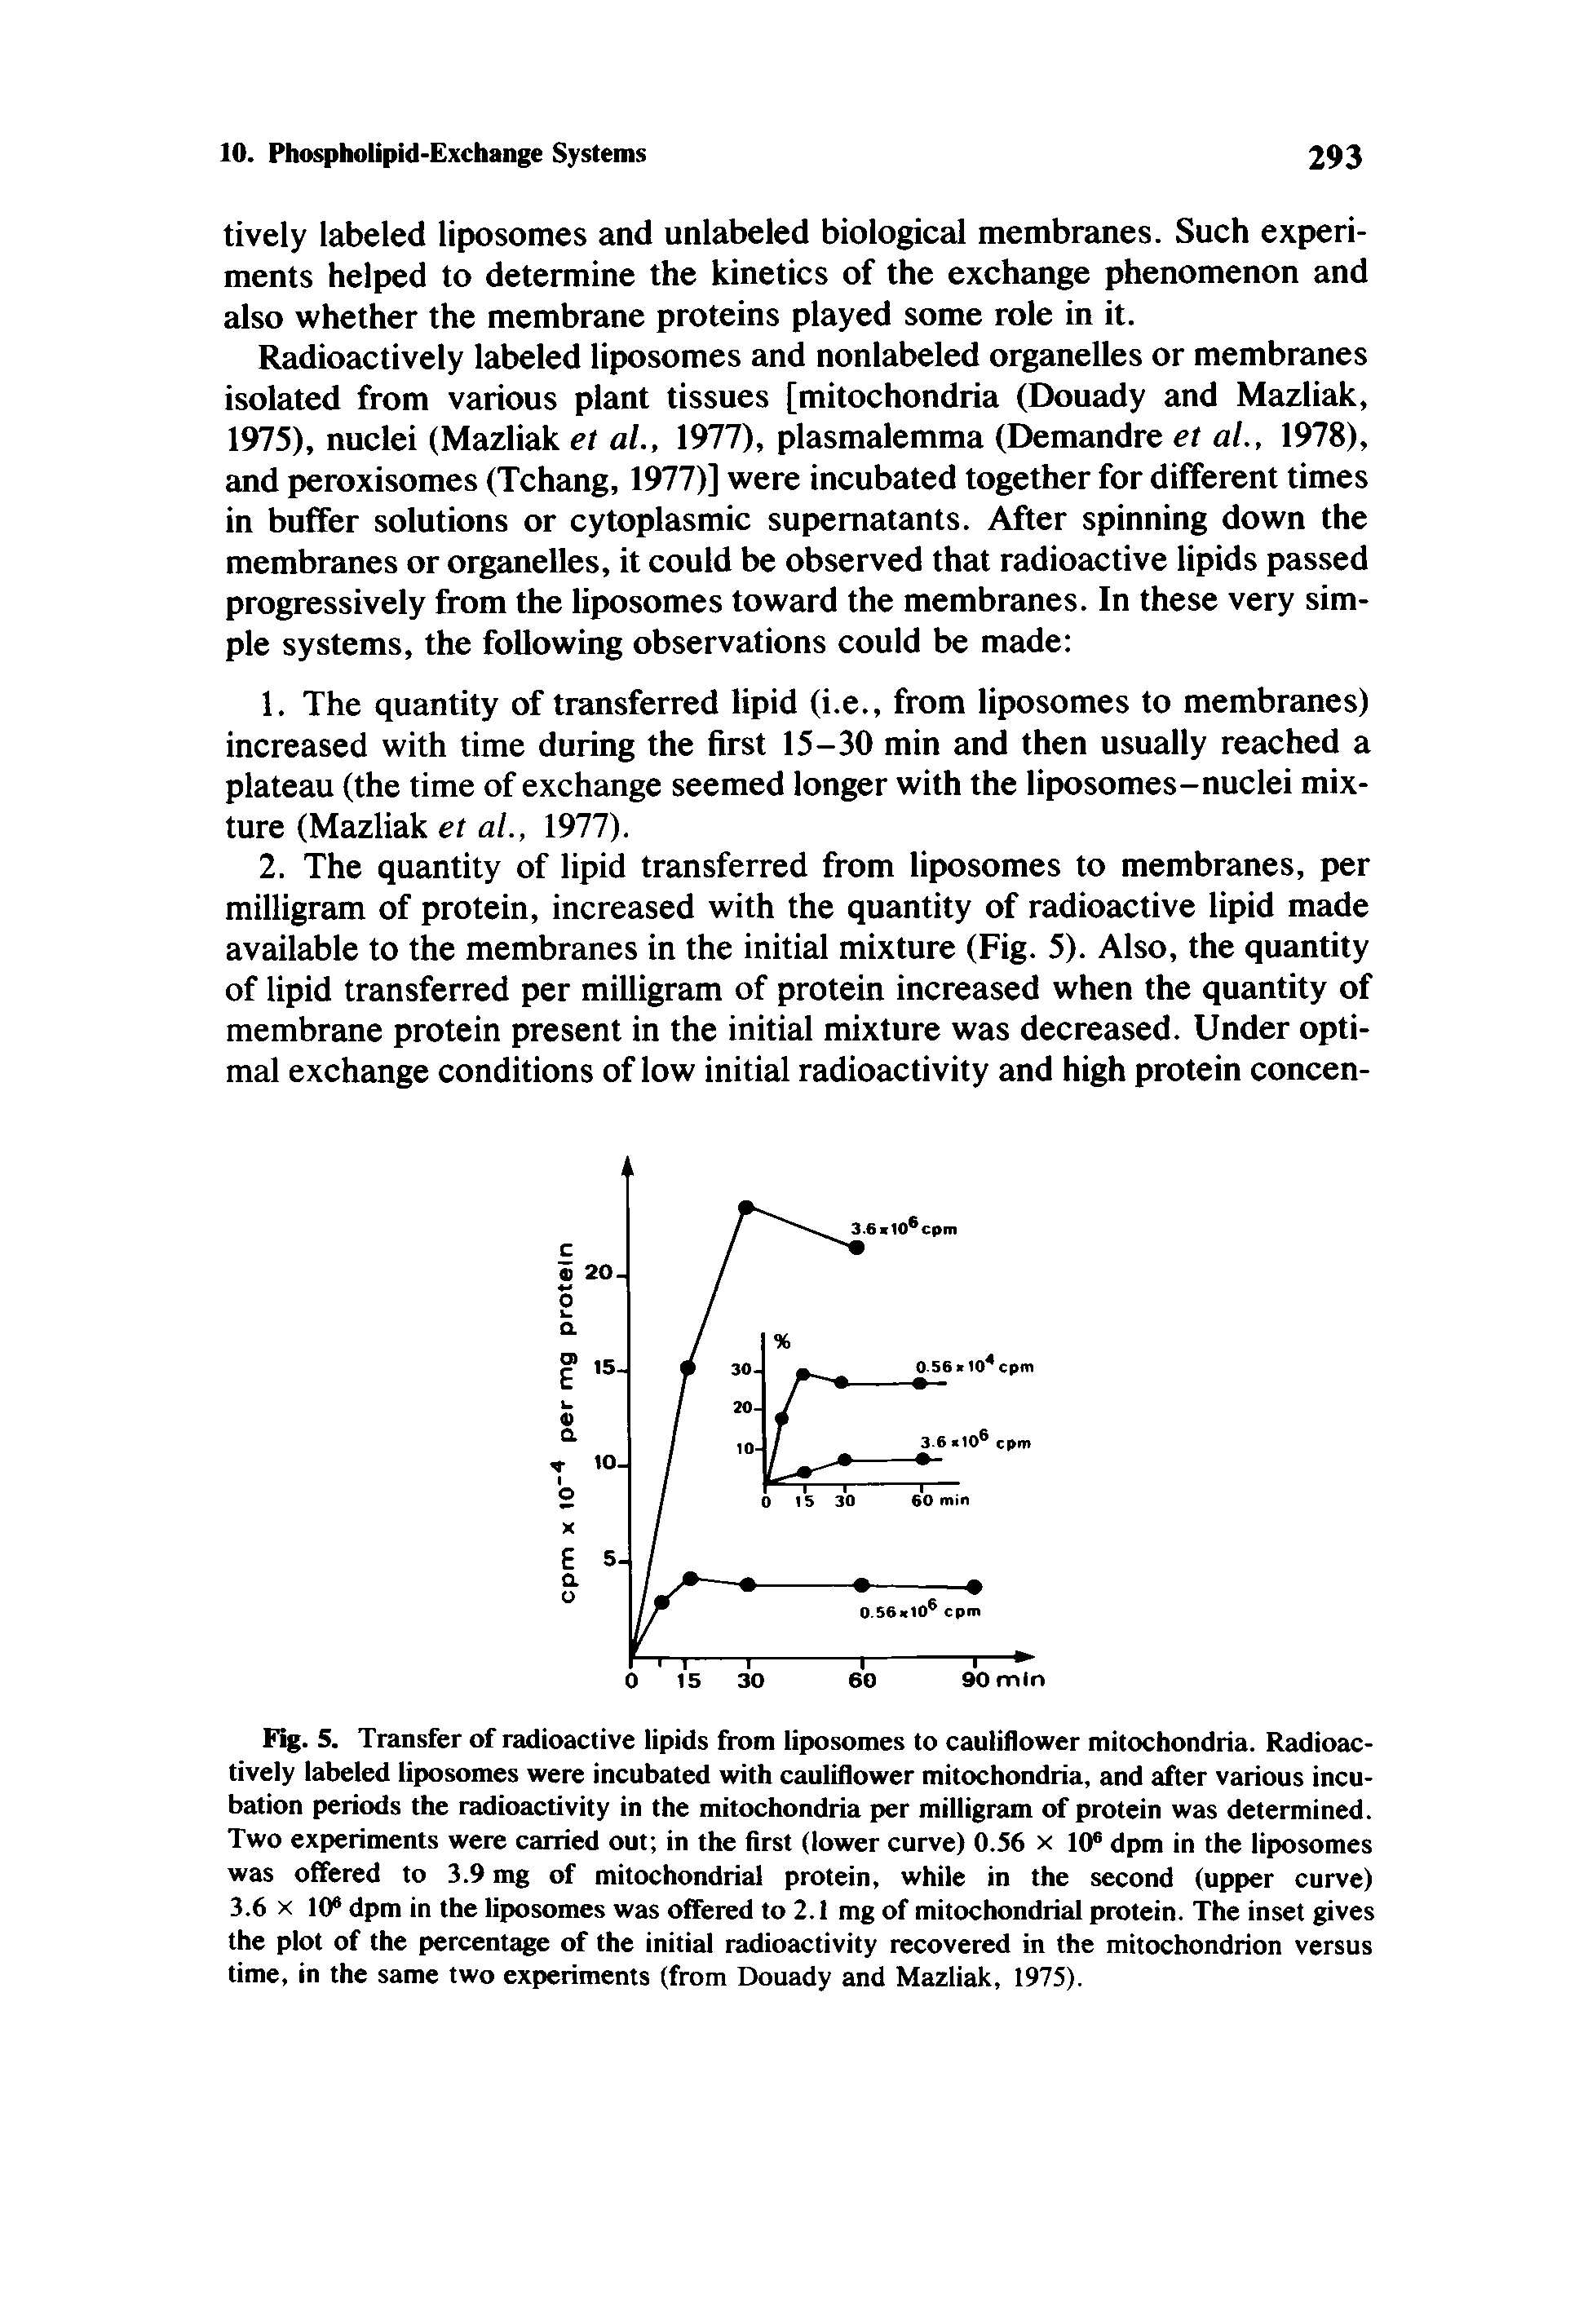 Fig. 5. Transfer of radioactive lipids from liposomes to cauliflower mitochondria. Radioactively labeled liposomes were incubated with cauliflower mitochondria, and after various incubation periods the radioactivity in the mitochondria per milligram of protein was determined. Two experiments were carried out in the first (lower curve) 0.56 x 10 dpm in the liposomes was offered to 3.9 mg of mitochondrial protein, while in the second (upper curve) 3.6 X 10 dpm in the liposomes was offered to 2.1 mg of mitochondrial protein. The inset gives the plot of the percentage of the initial radioactivity recovered in the mitochondrion versus time, in the same two experiments (from Douady and Mazliak, 1975).